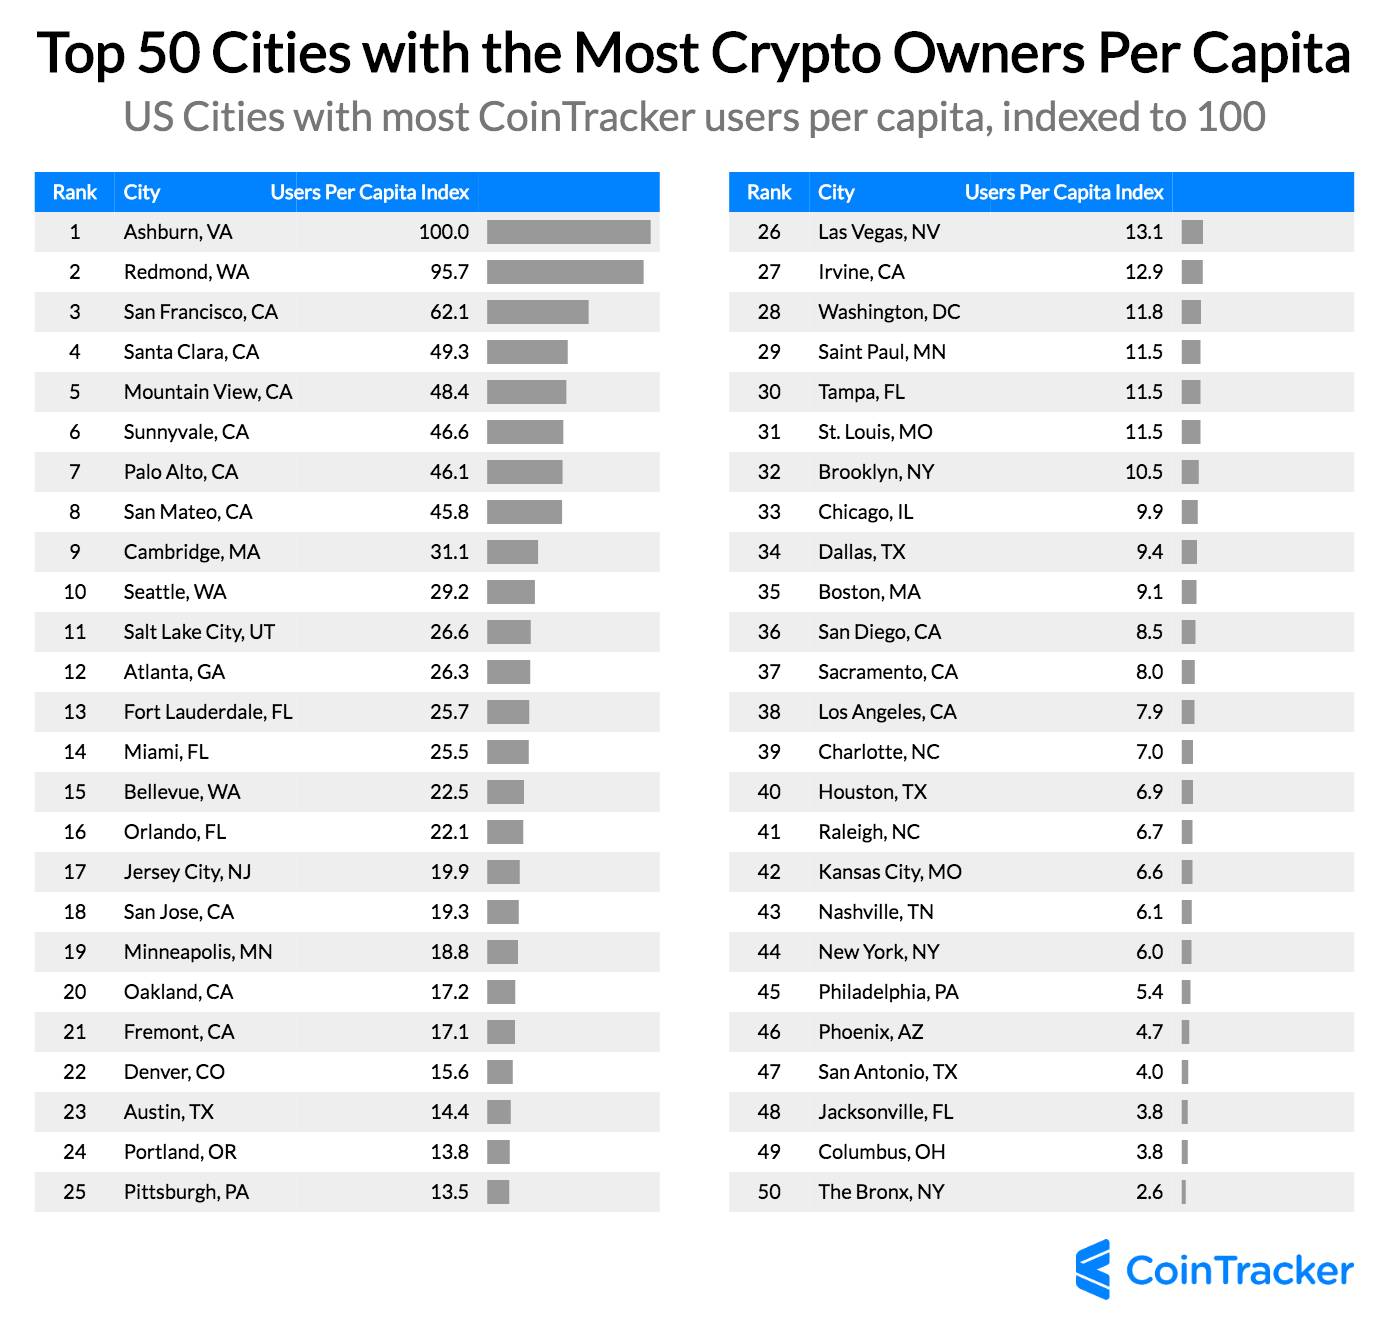 cities with the most crypto owners per capita